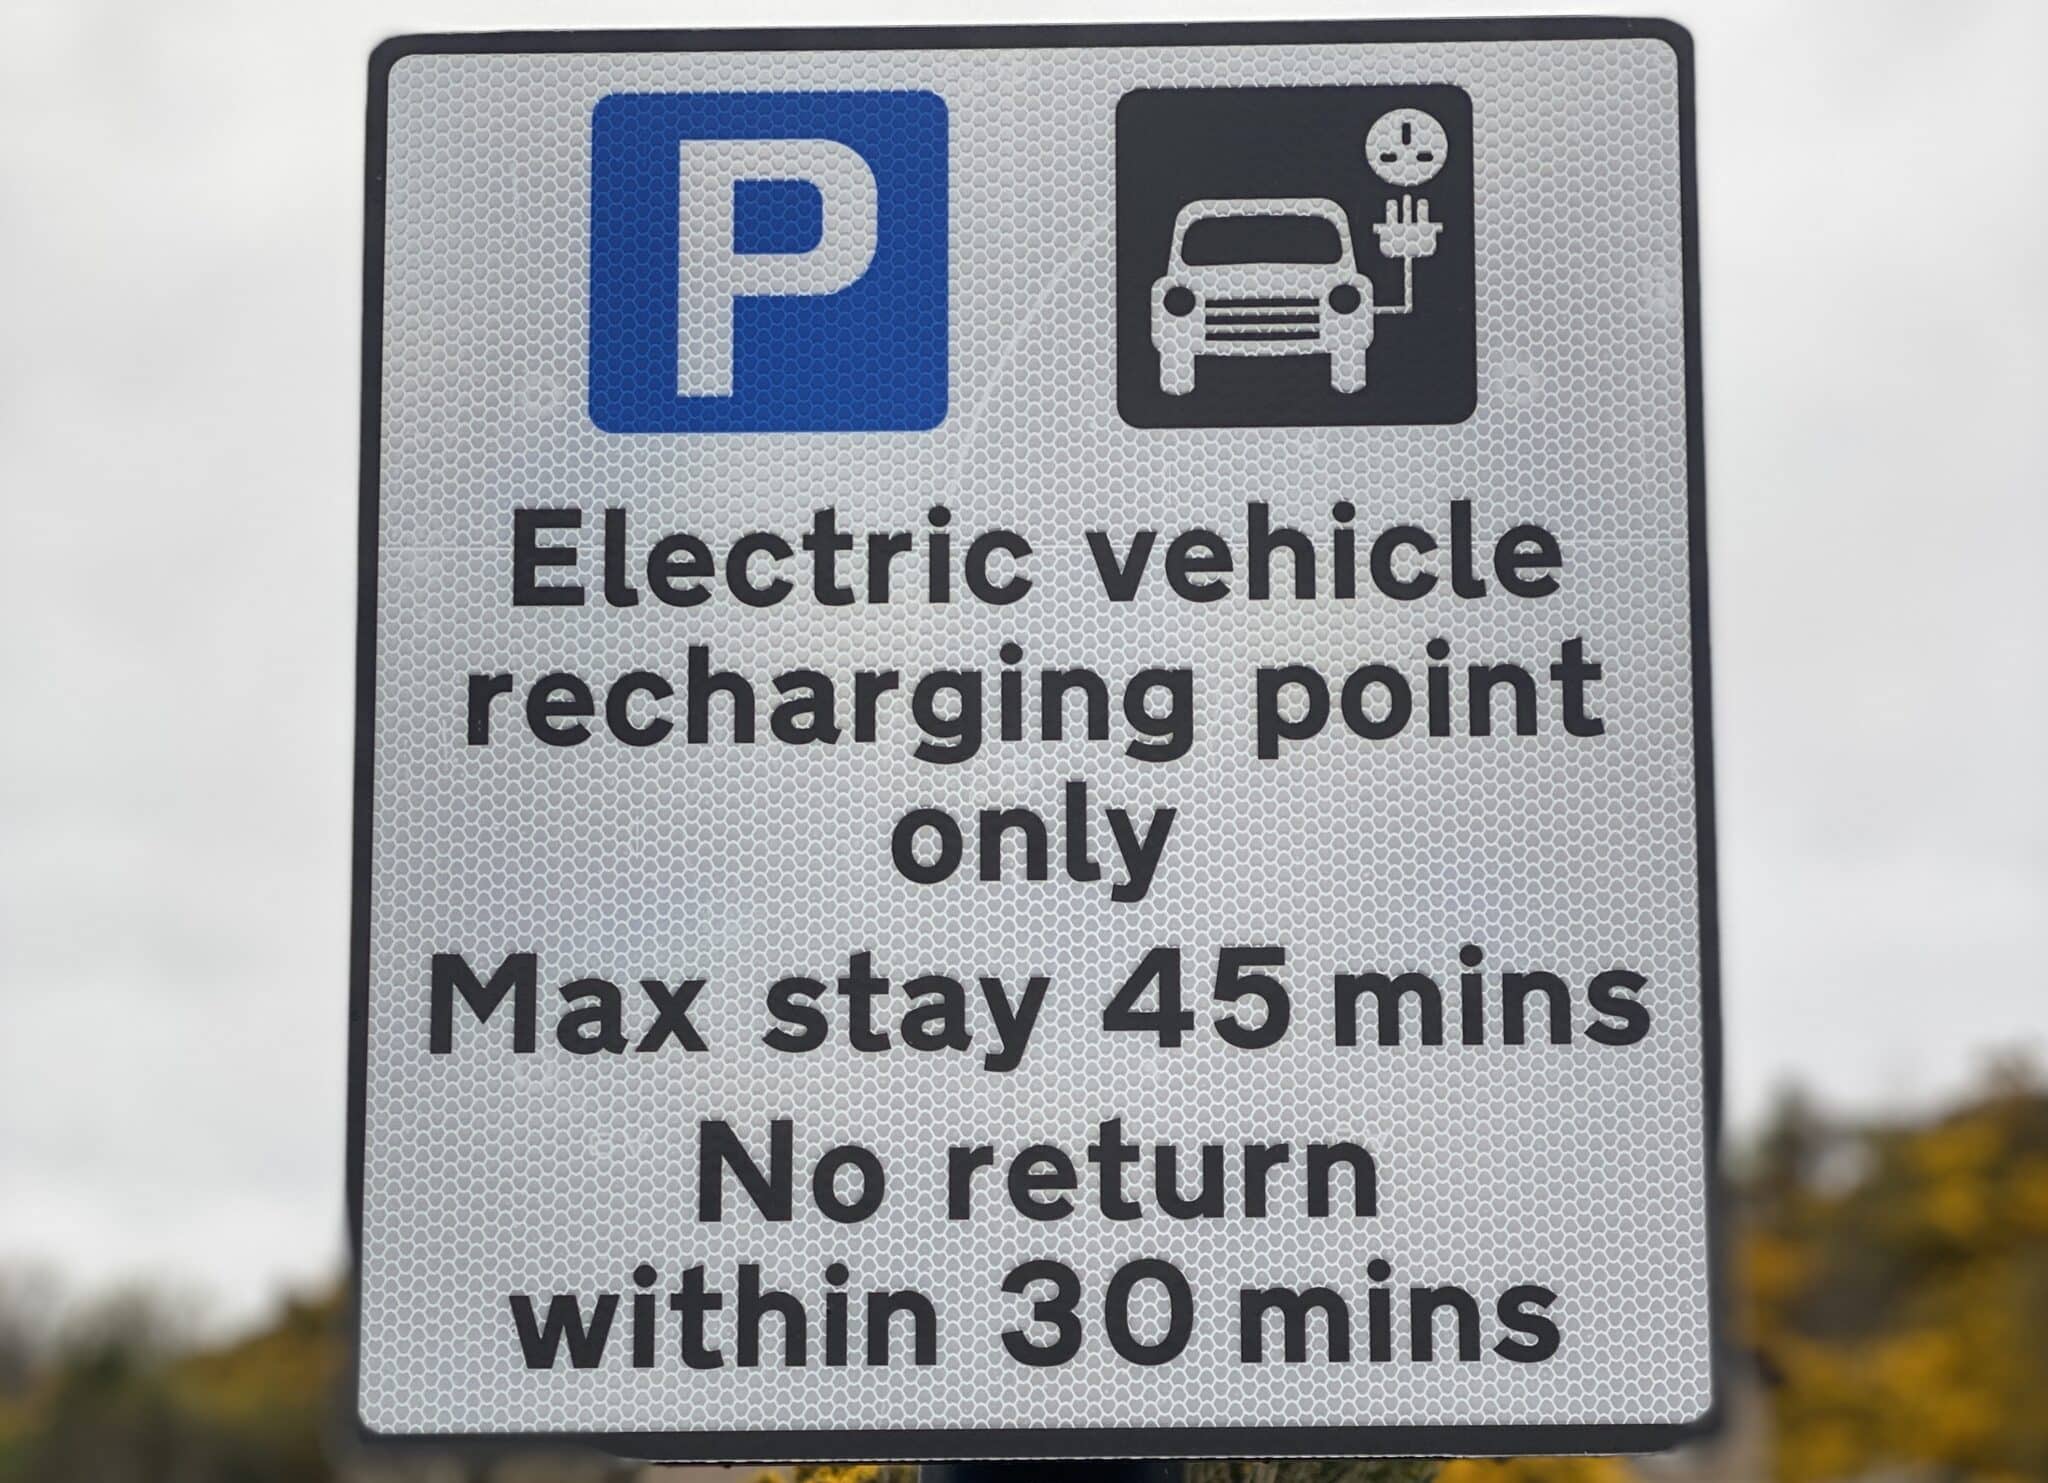 Guide to stress-free EV charging – tips on how to plan ahead